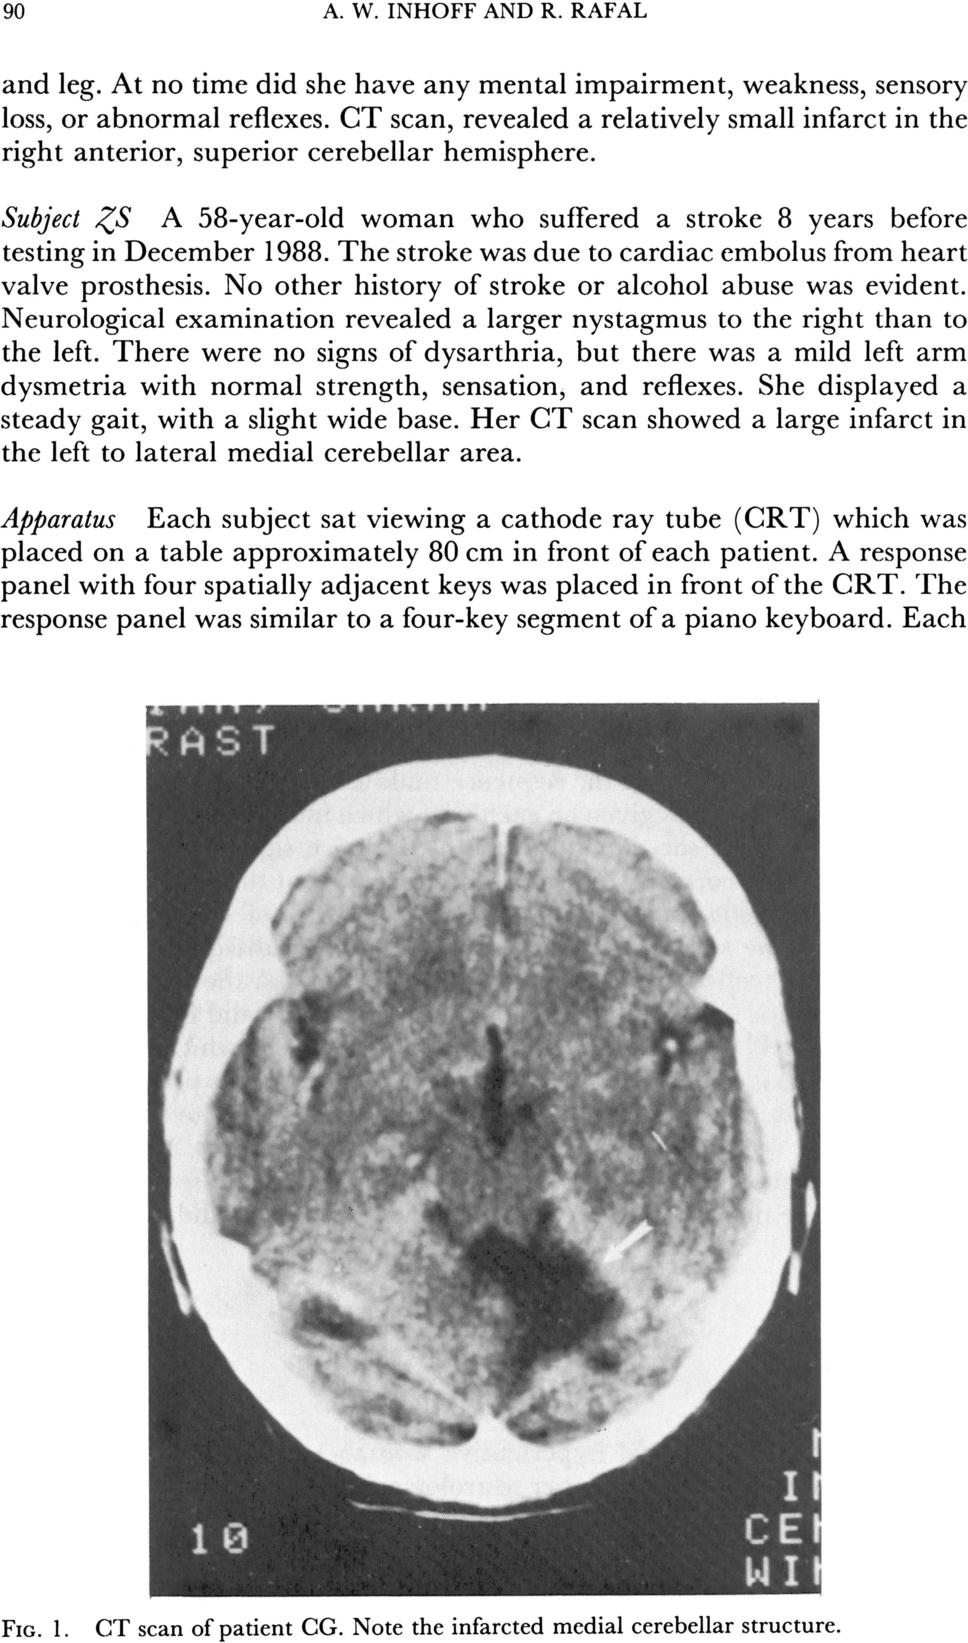 90 A. W. INHOFF AND R. RAFAL and leg. At no time did she have any mental impairment, weakness, sensory loss, or abnormal reflexes.